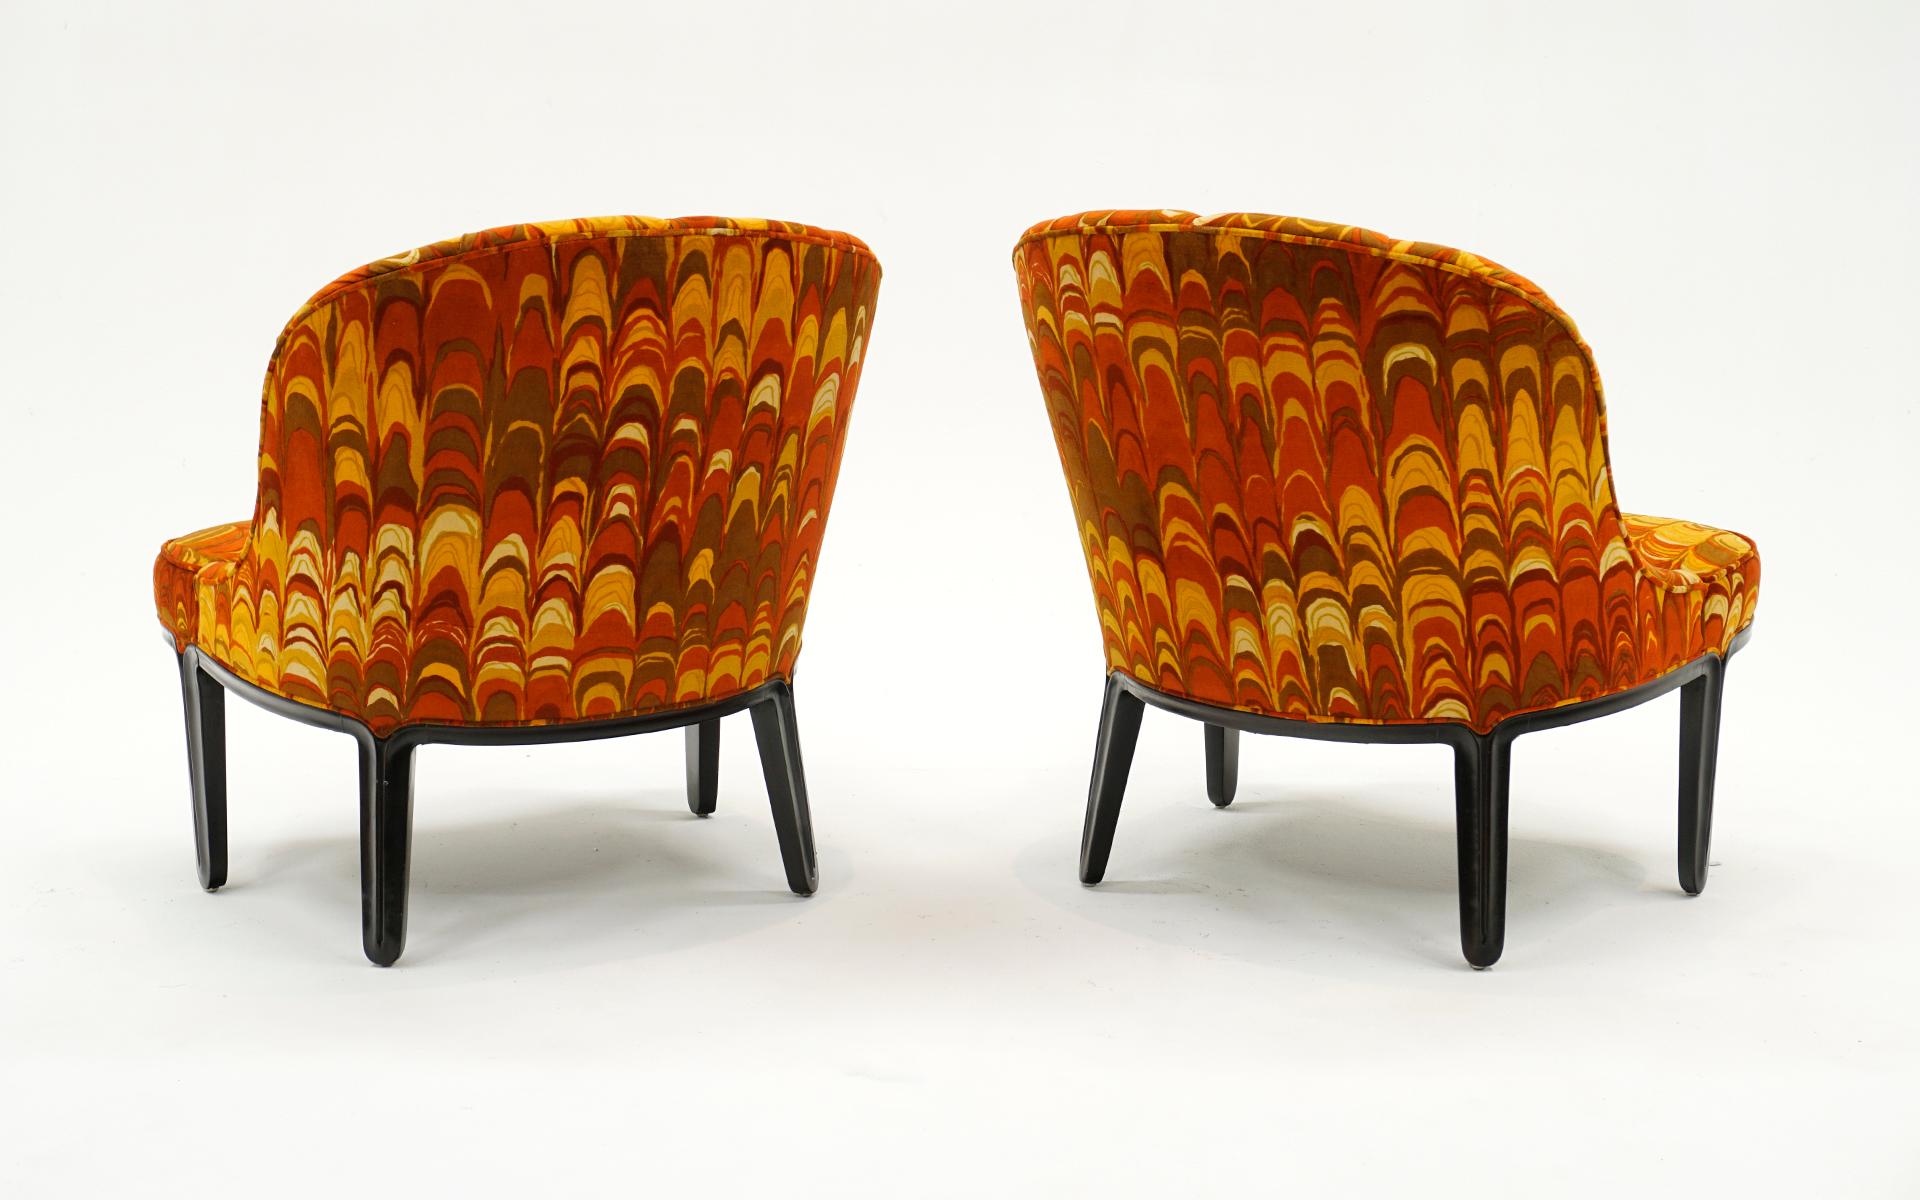 American Pair Armless Janus Chairs by Edward Wormley. Rare orangeJack Lenor Larsen Fabric For Sale